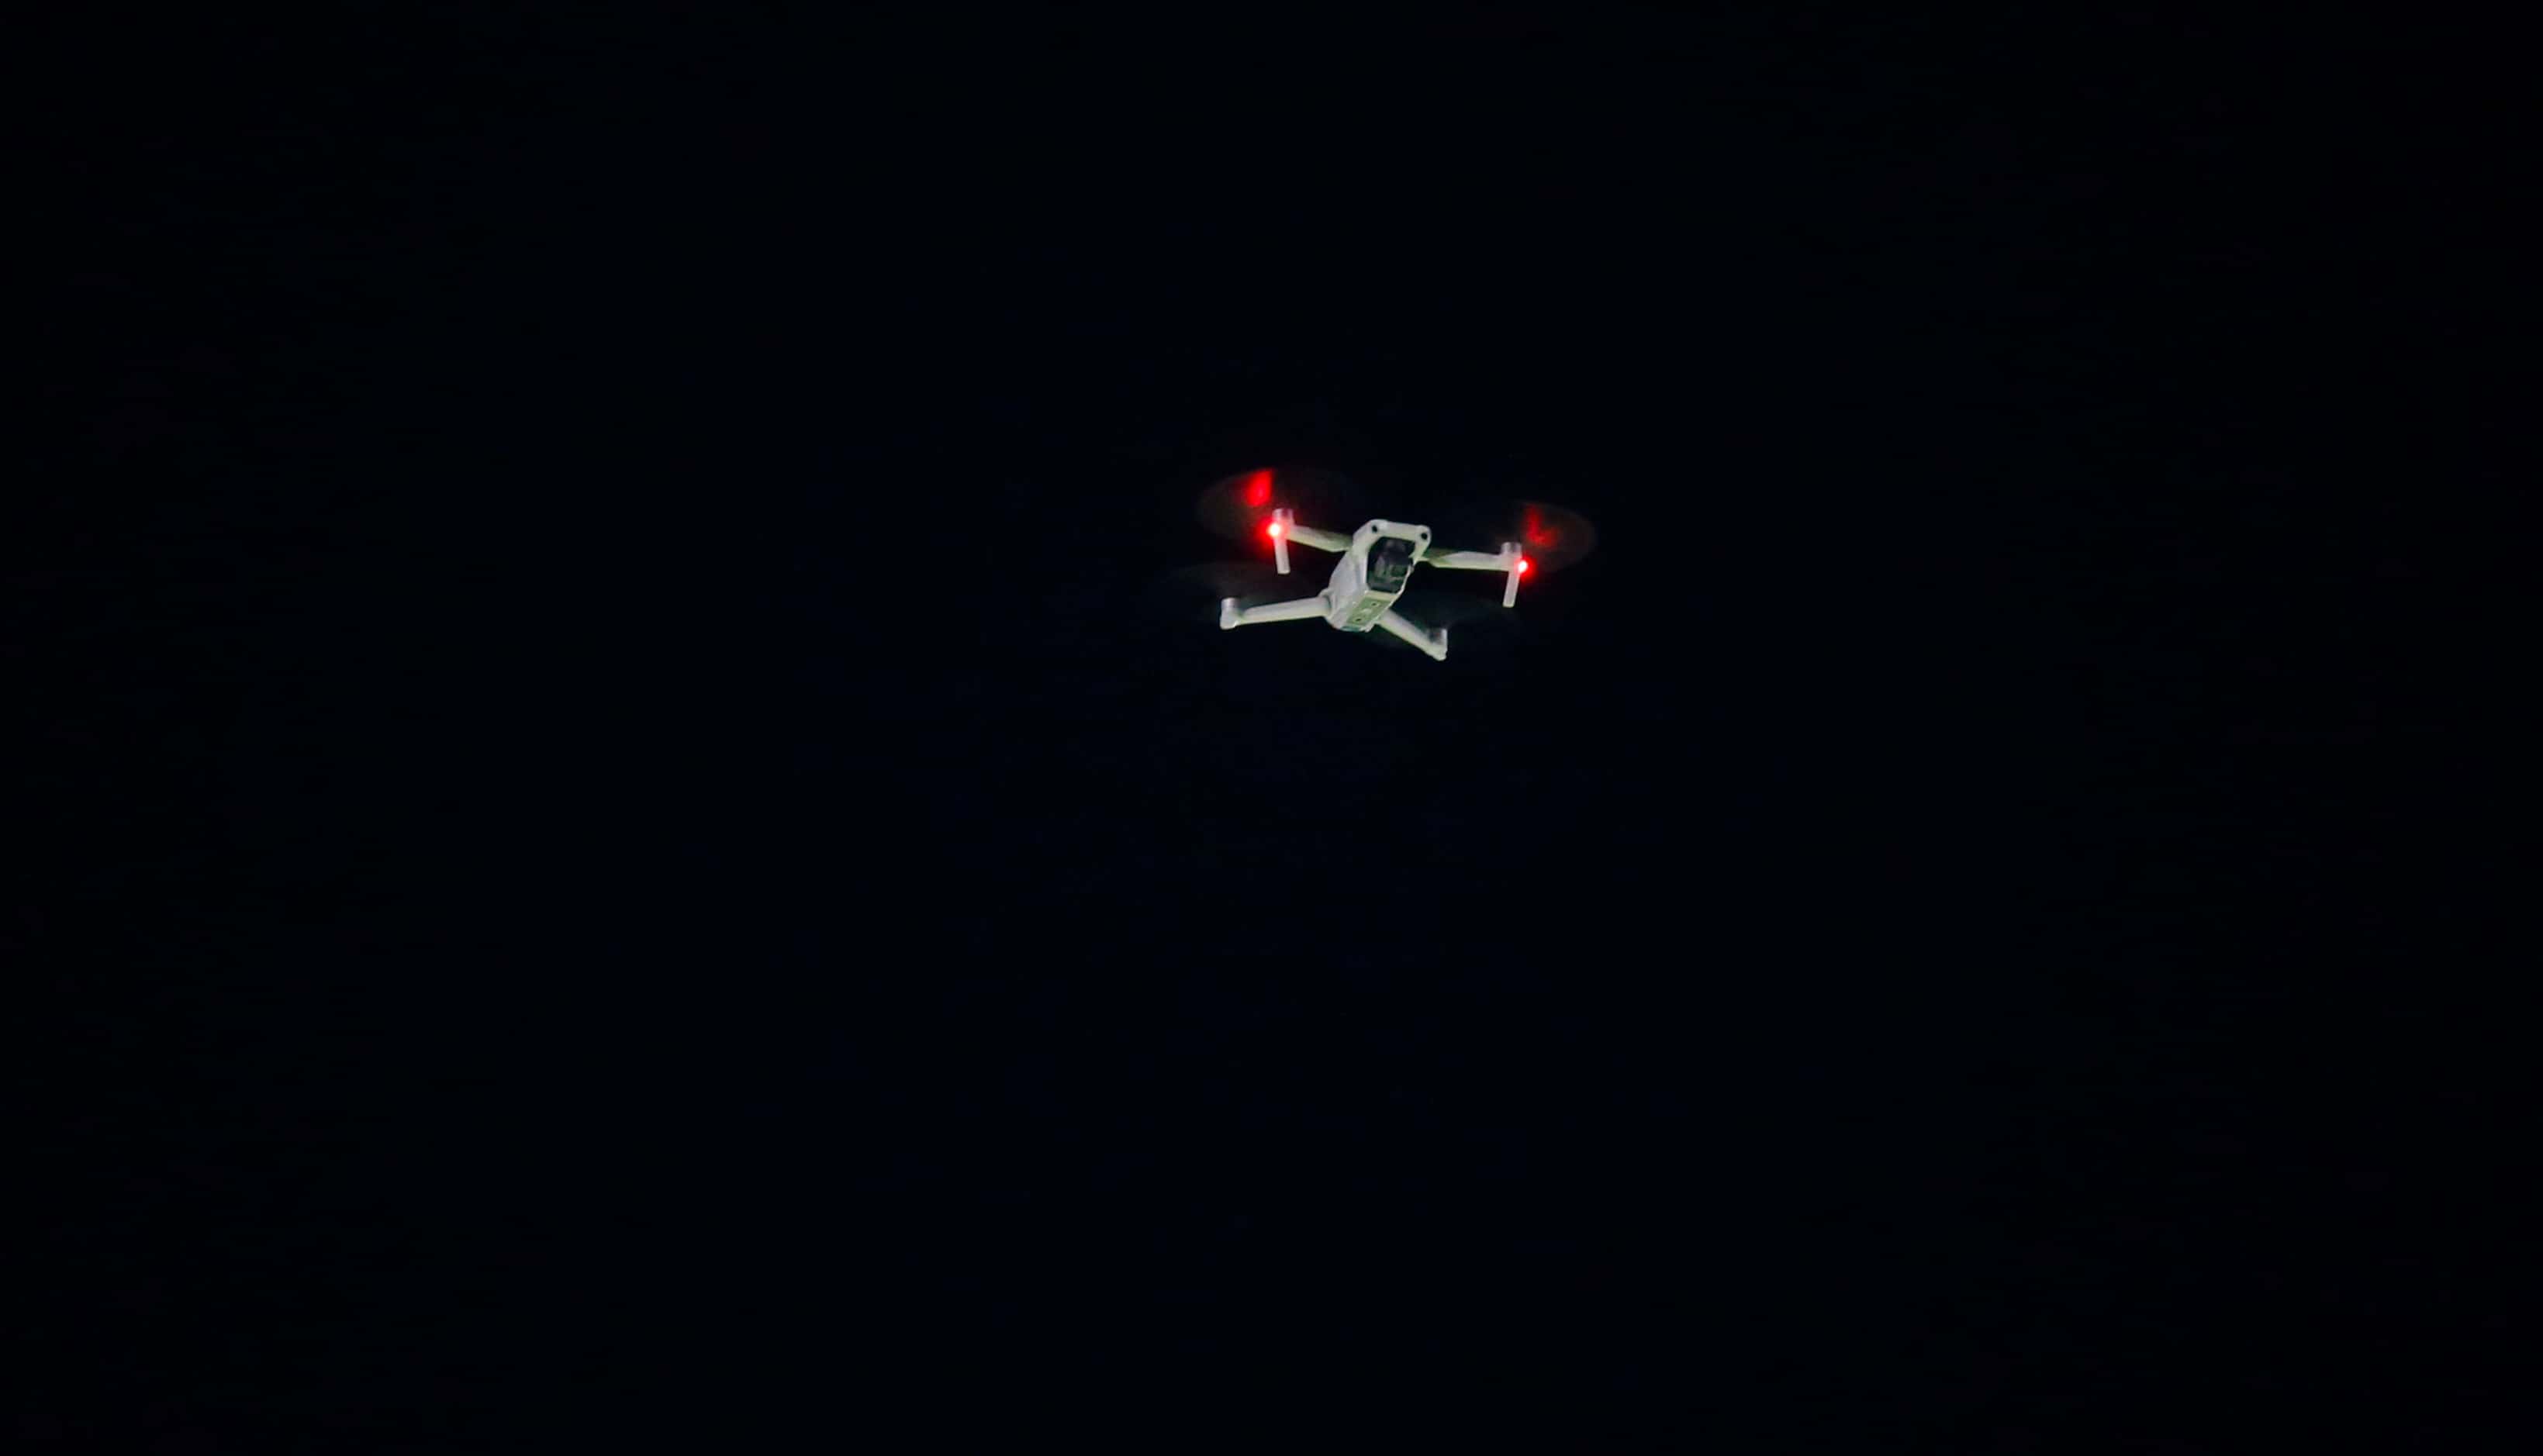 A drone invades the airspace above the football field, delaying the game for several...